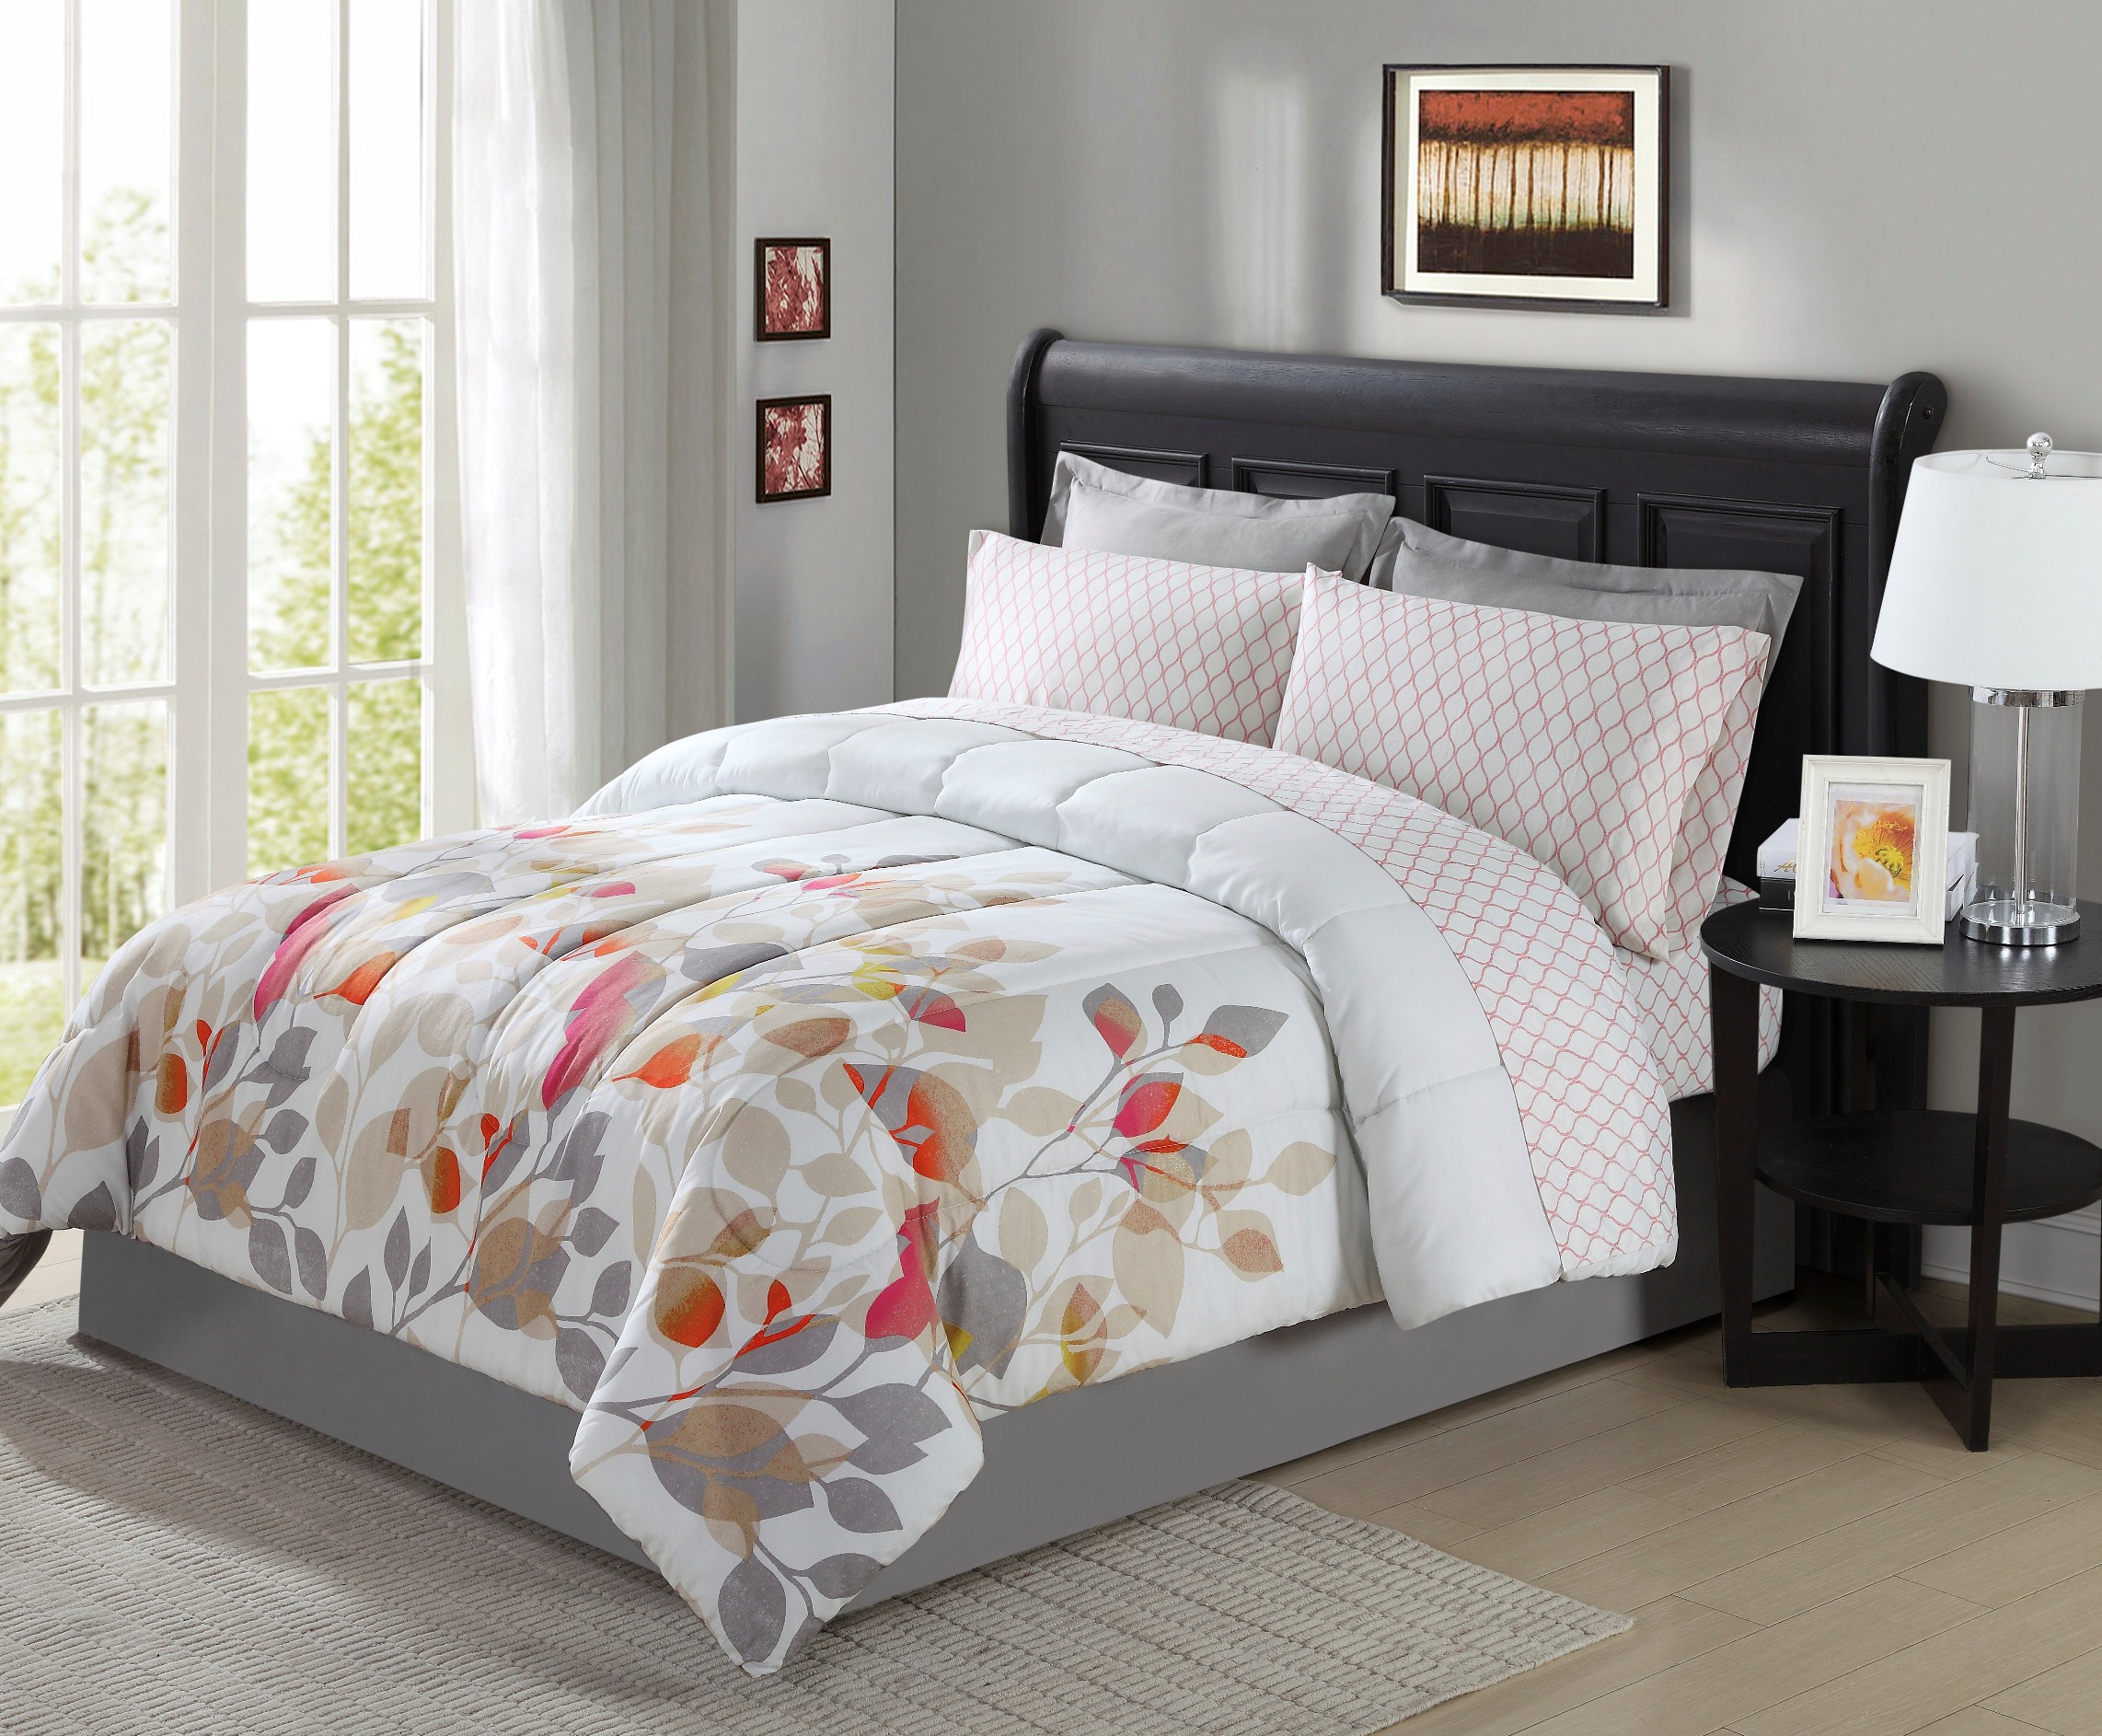 bed sets colormate complete bed set - bree HZBYQQX